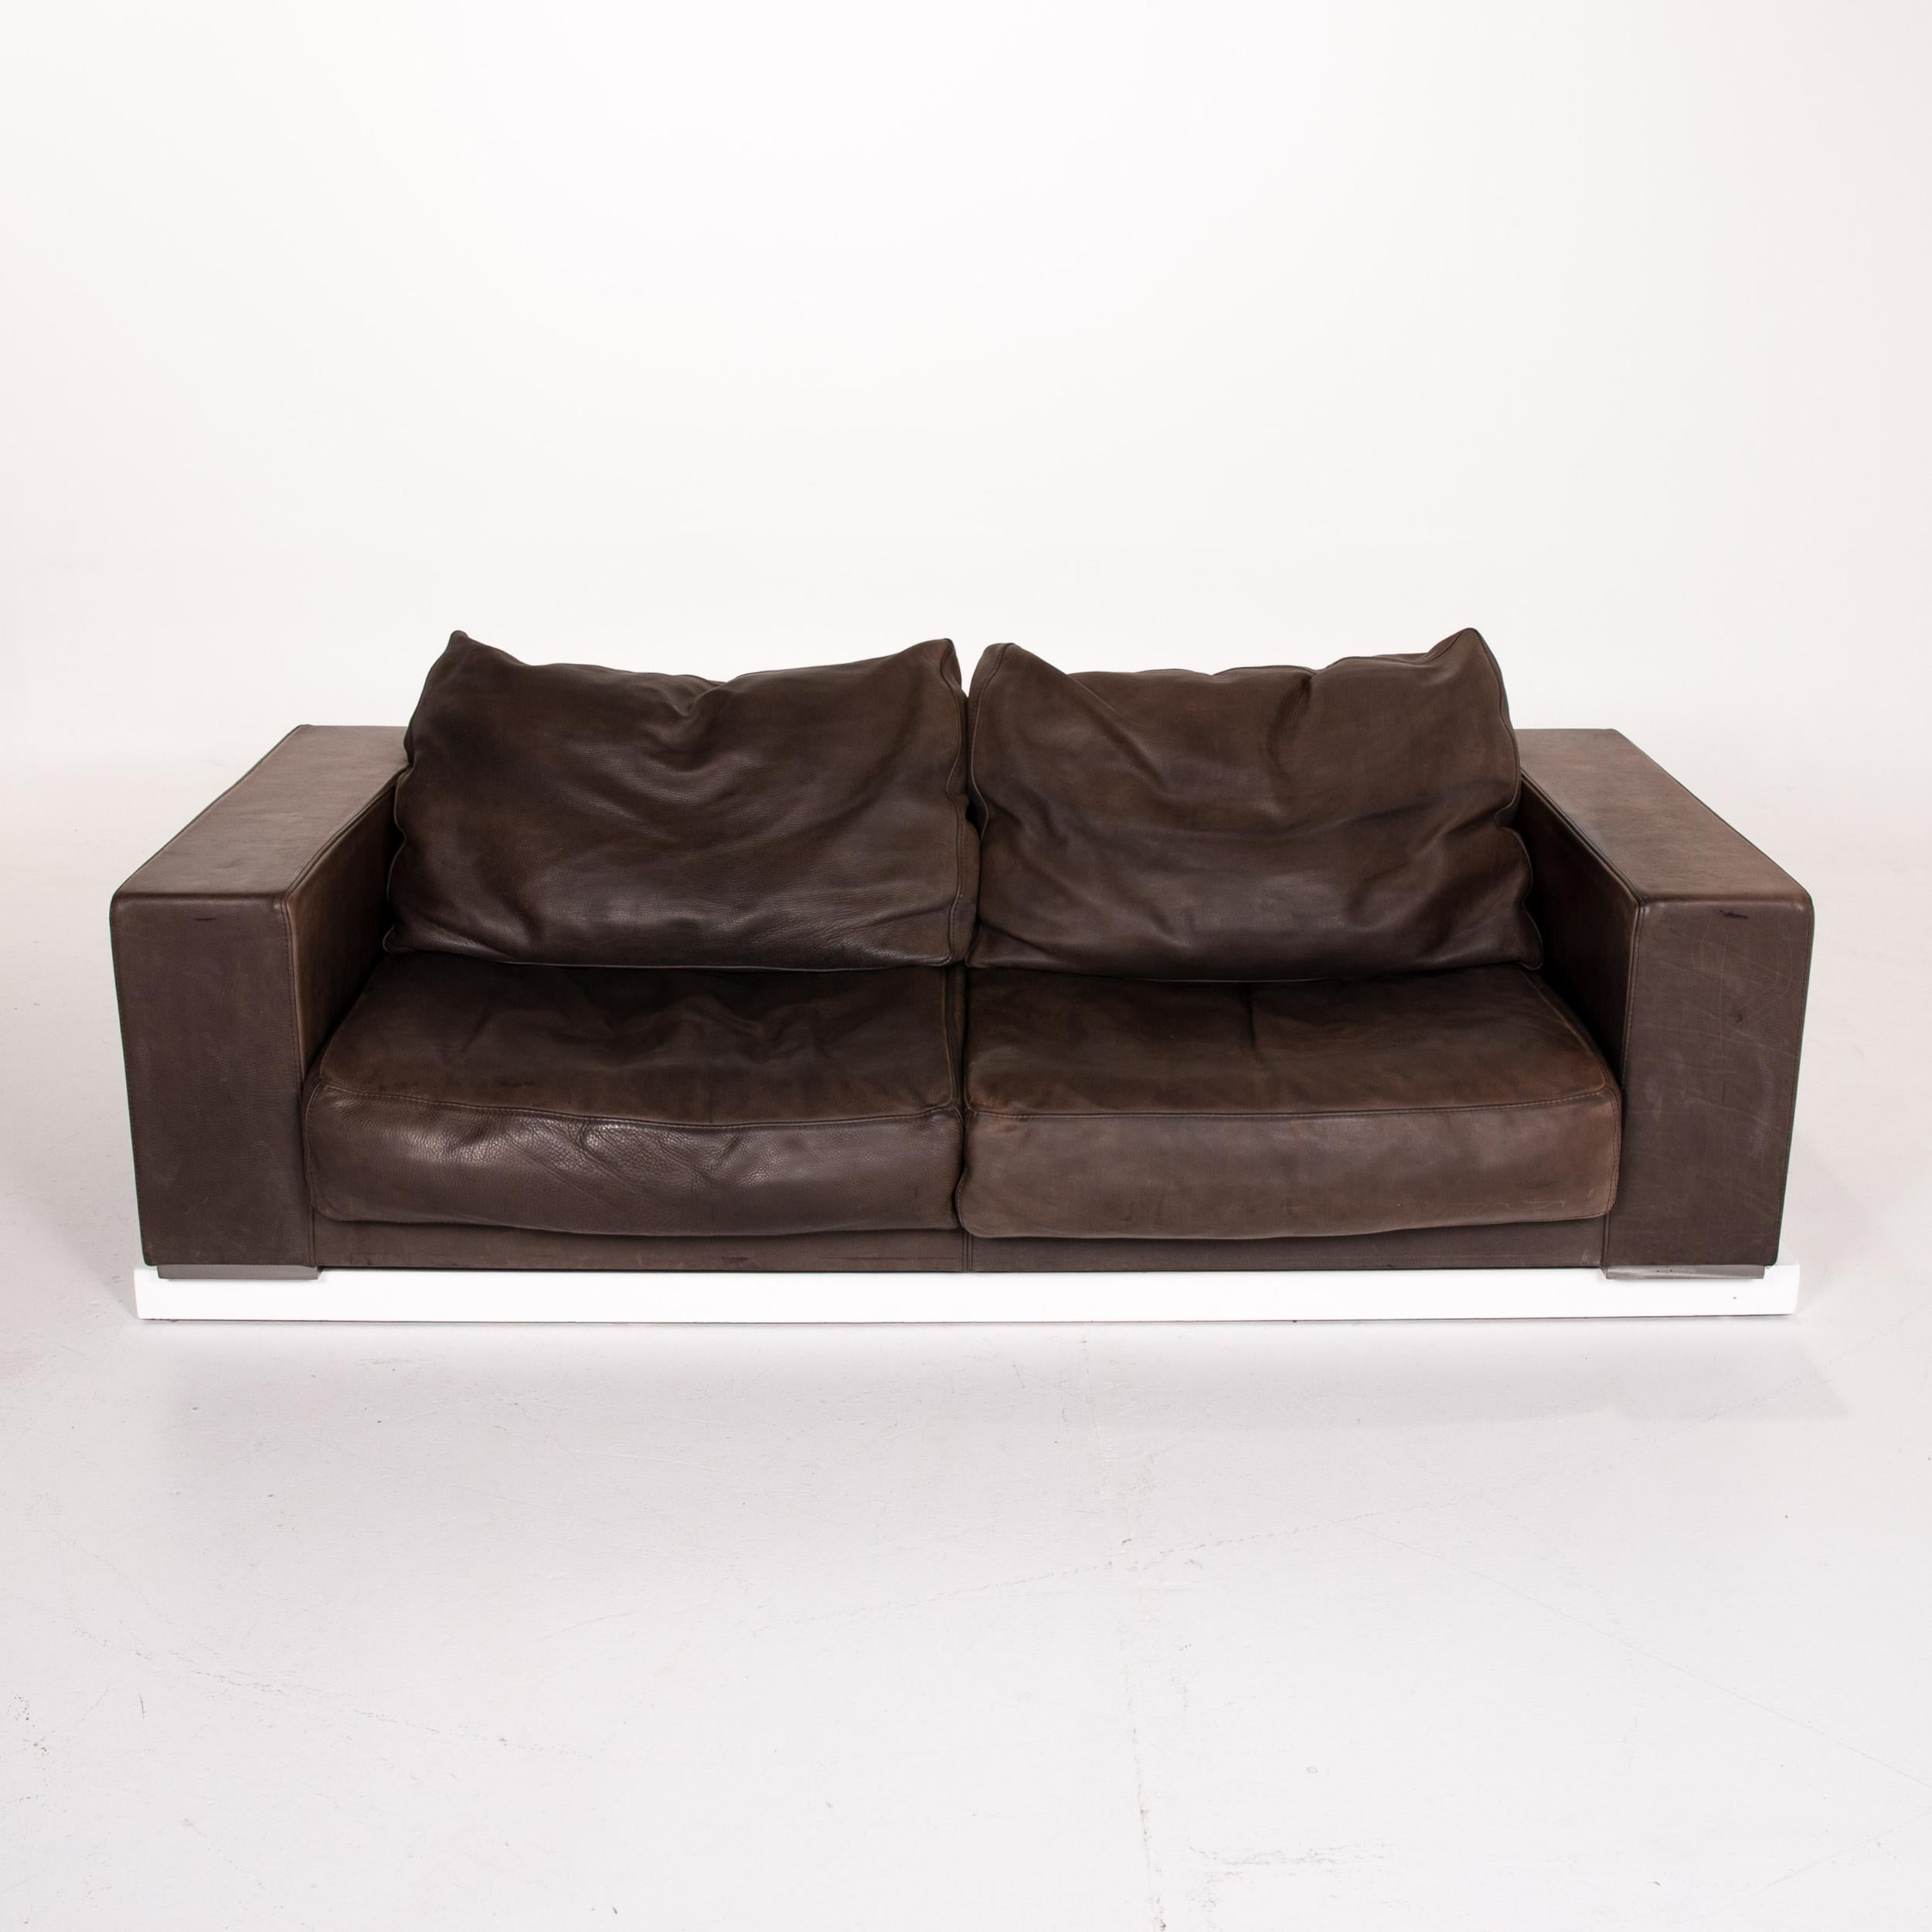 Baxter Budapest Leather Sofa Brown Two-Seat Couch 14016 For Sale 1